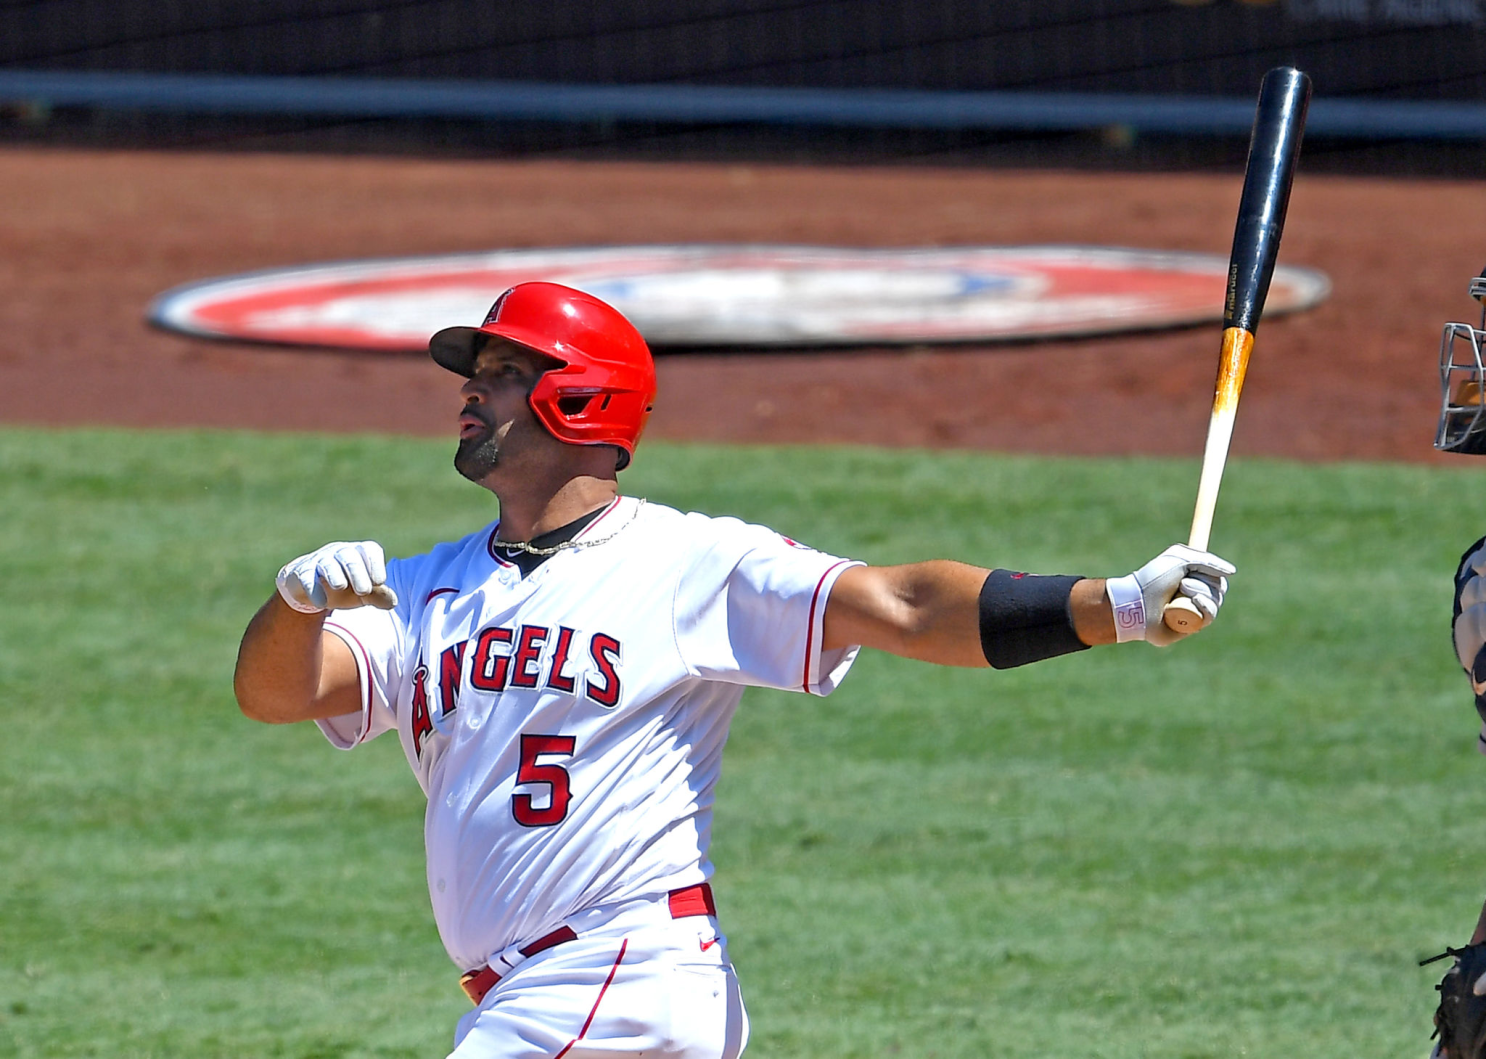 Pujols hits 696th HR, ties A-Rod for fourth all-time